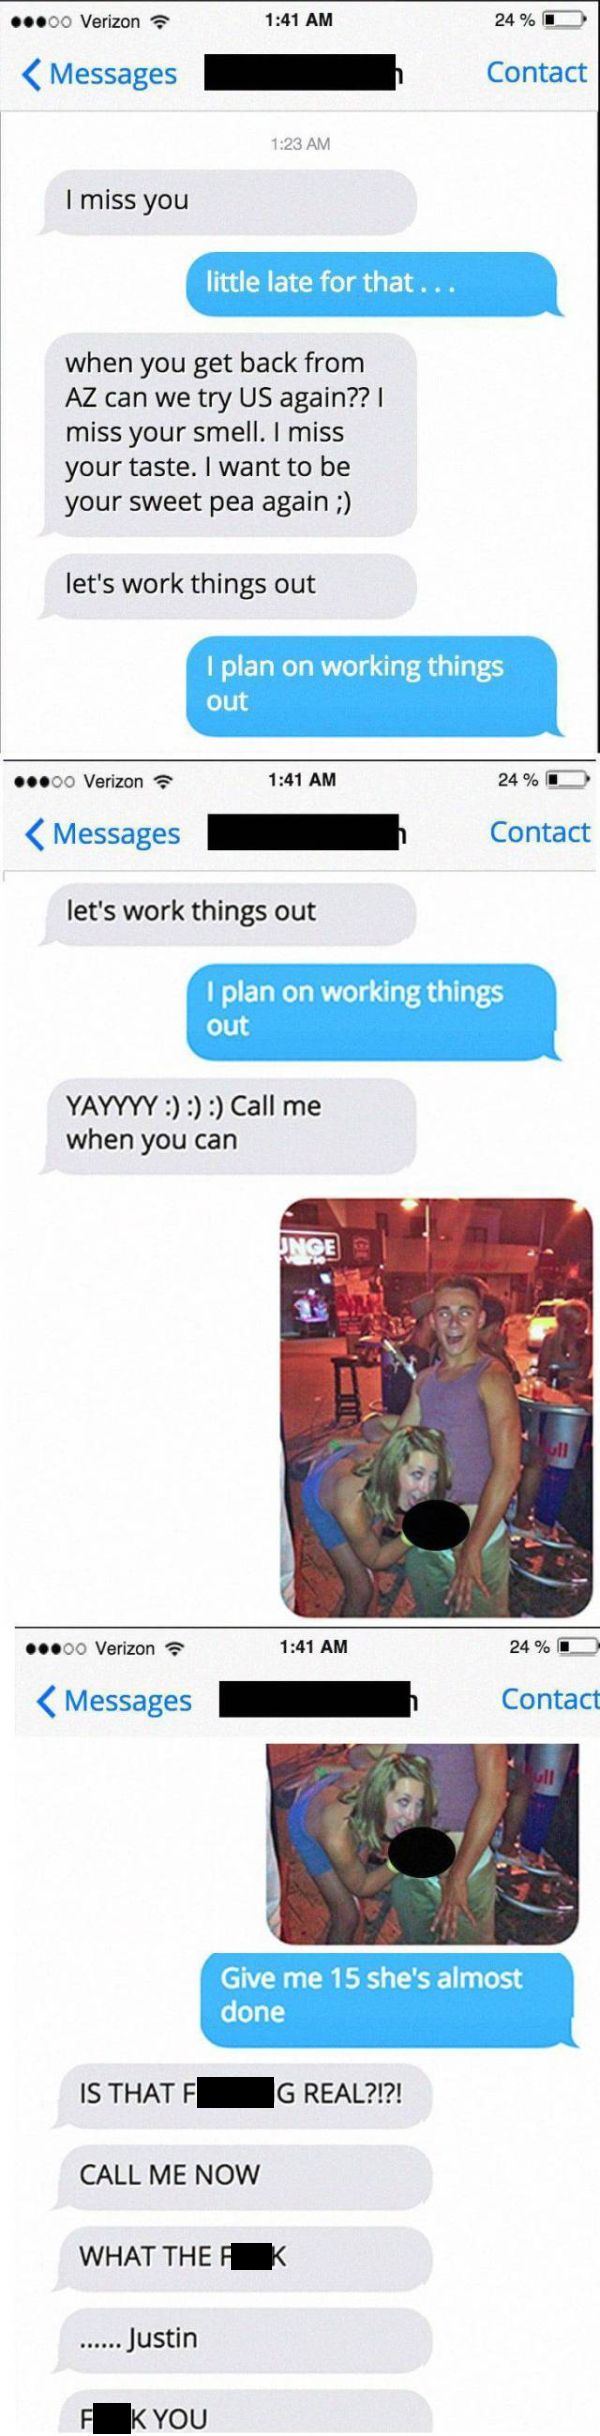 Scorned Lovers Who Got Revenge On Their Exes By Trolling Them (36 pics)